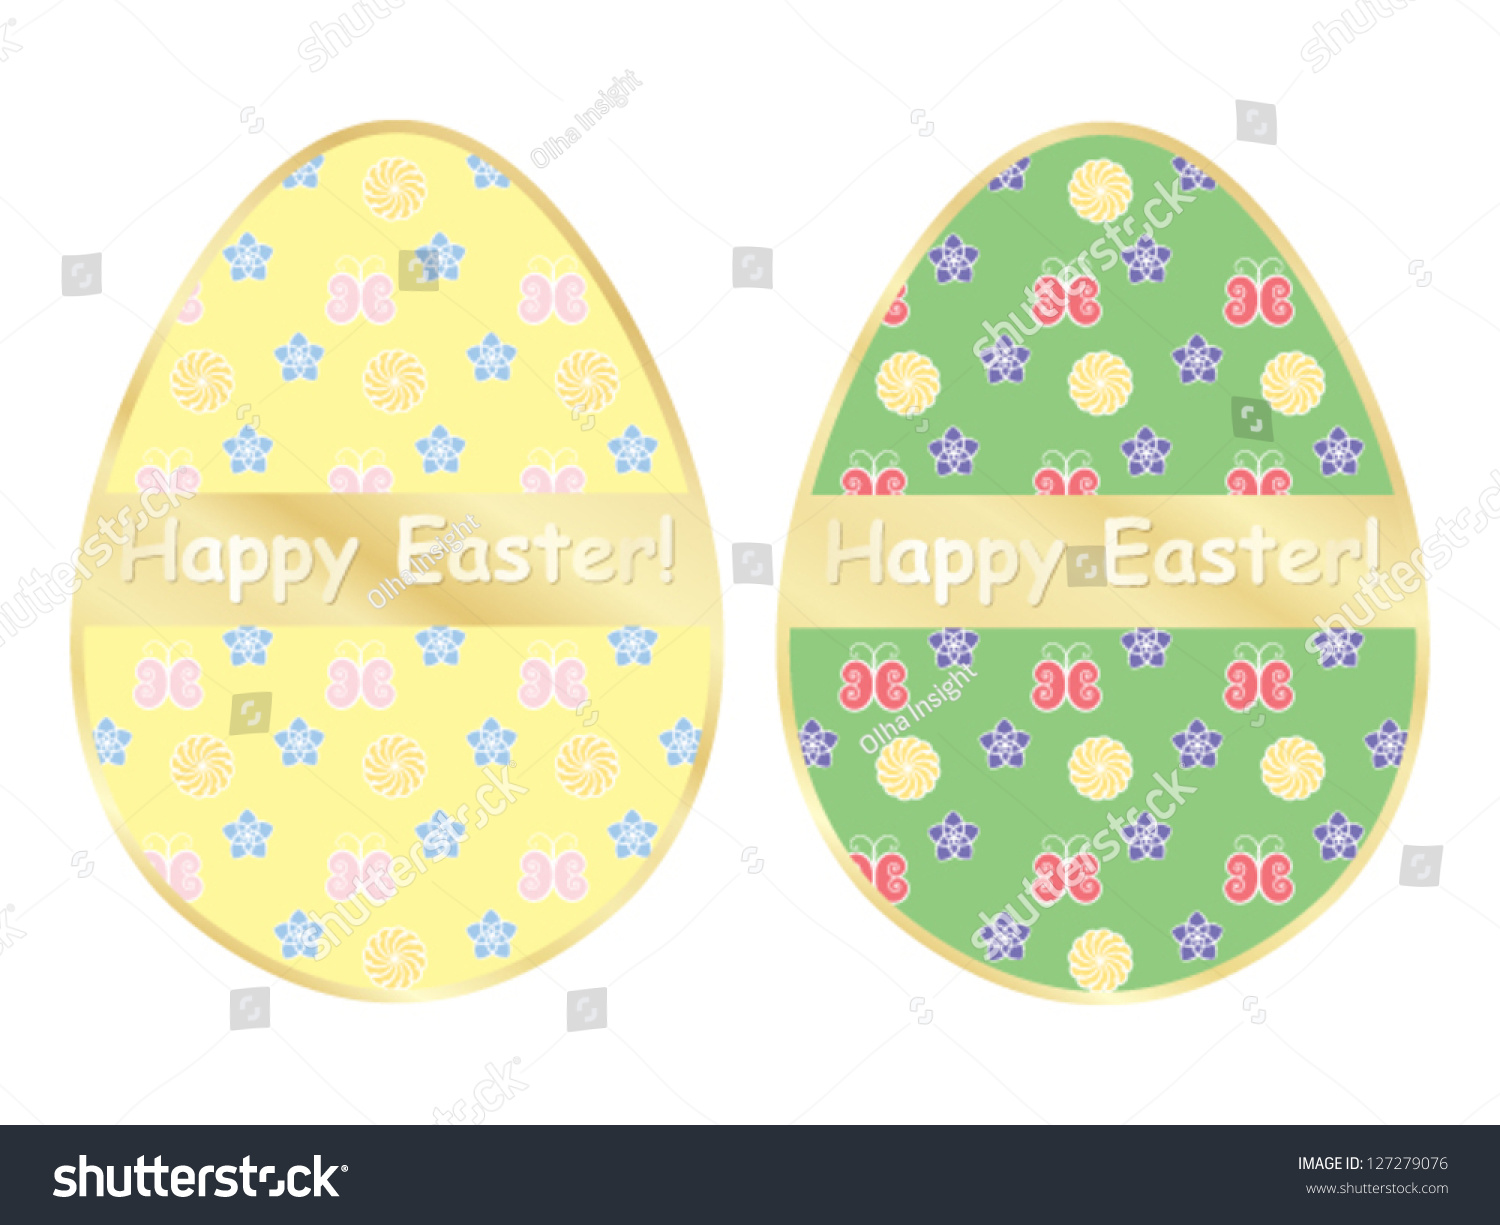 Two Happy Easter Congratulation Cards Royalty Free Stock Vector 127279076